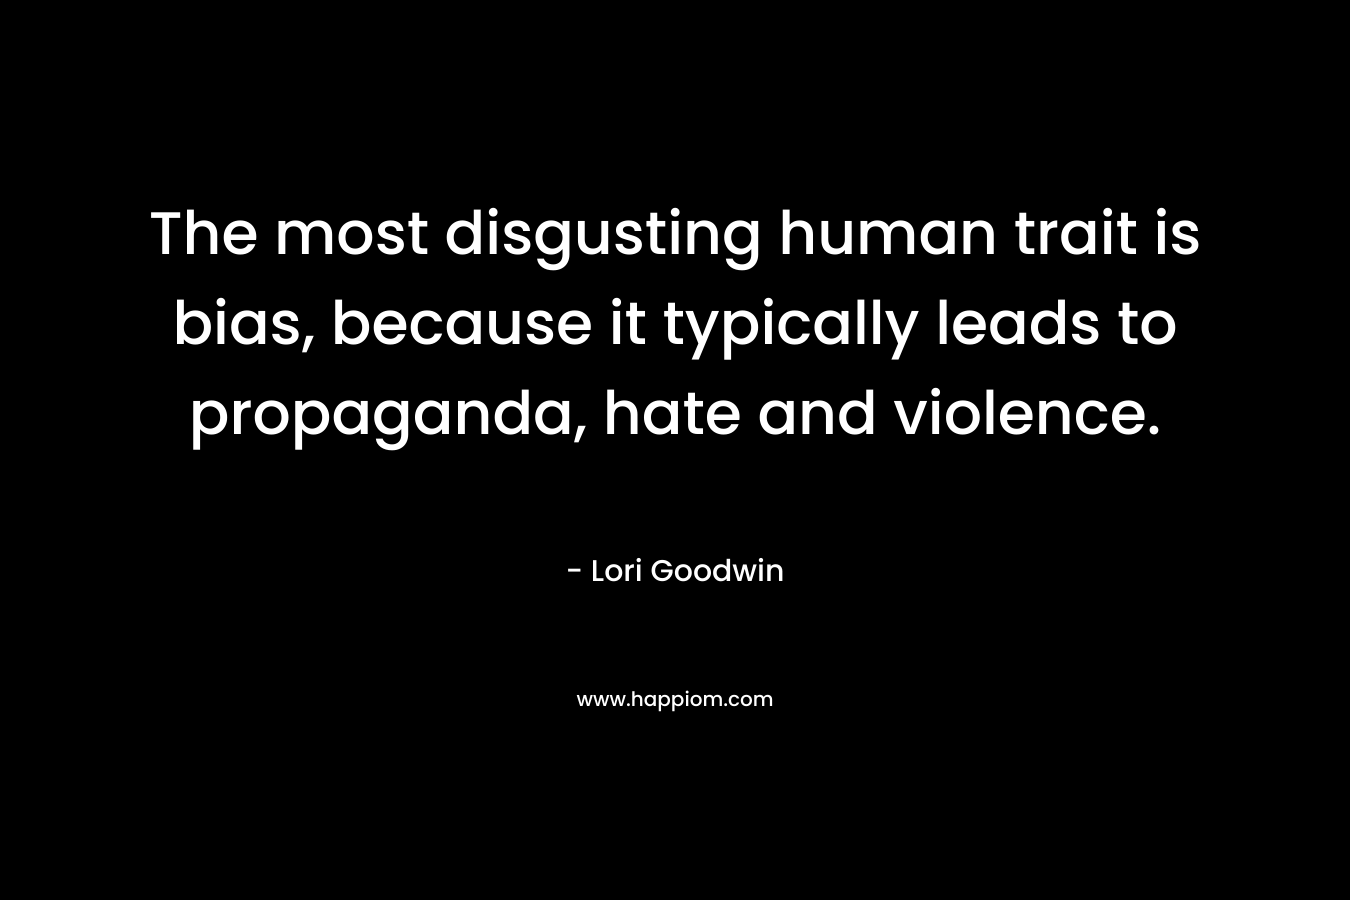 The most disgusting human trait is bias, because it typically leads to propaganda, hate and violence.